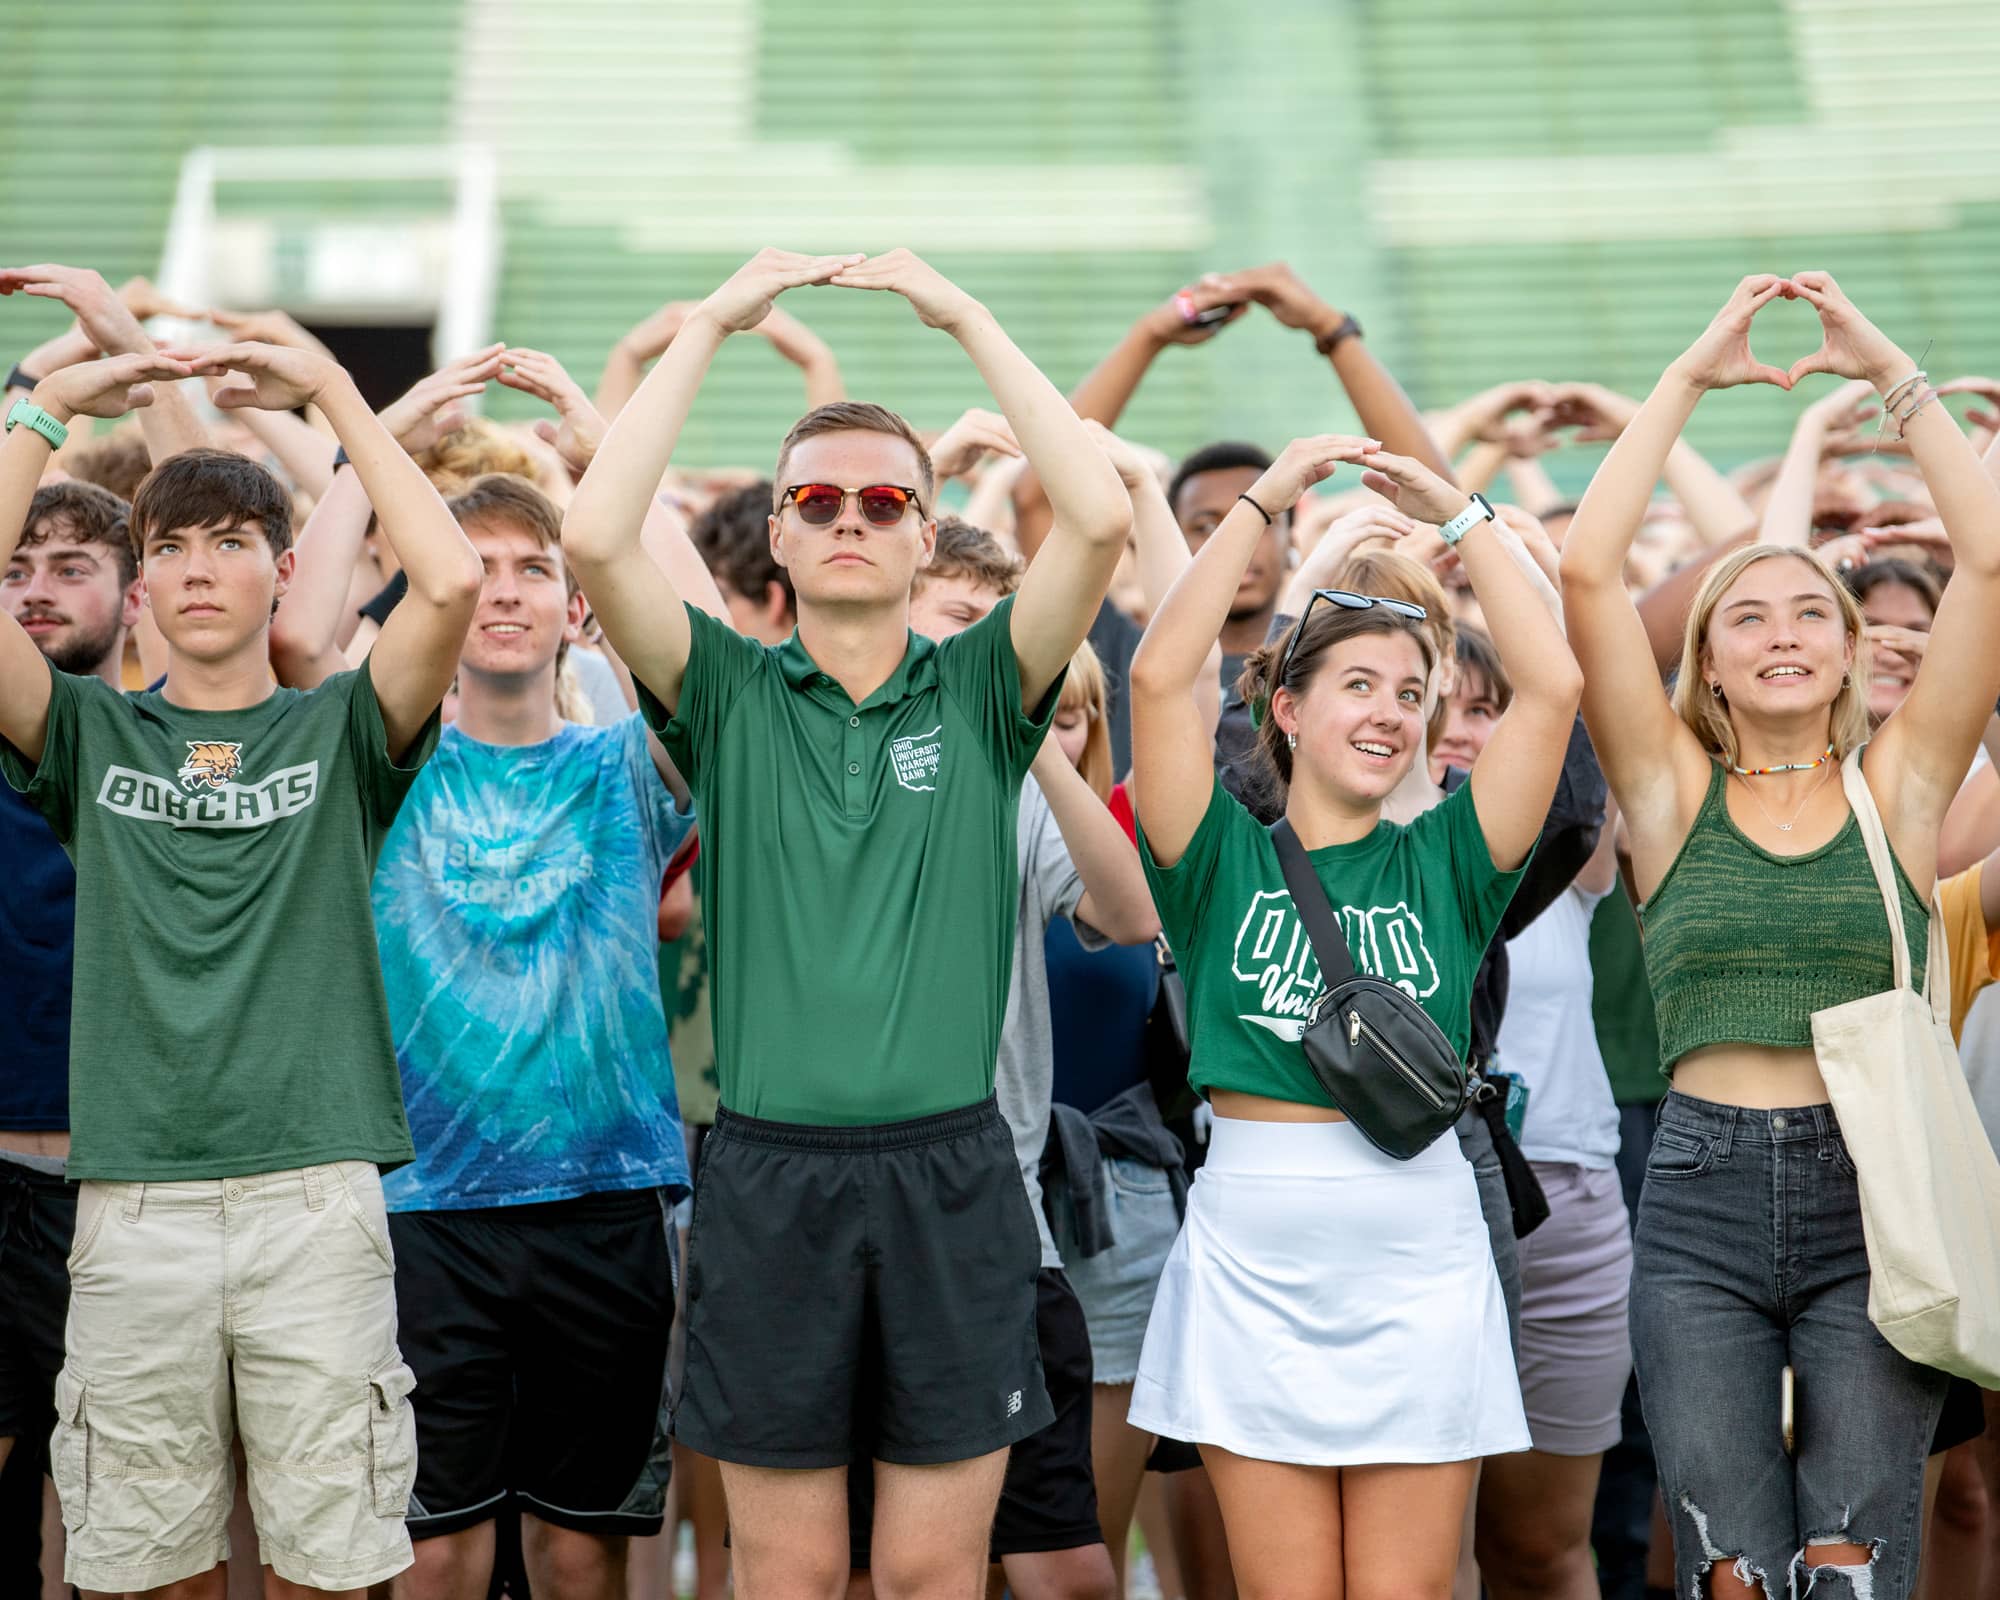 Students make the letter O with their arms during the class photo at Peden Stadium.